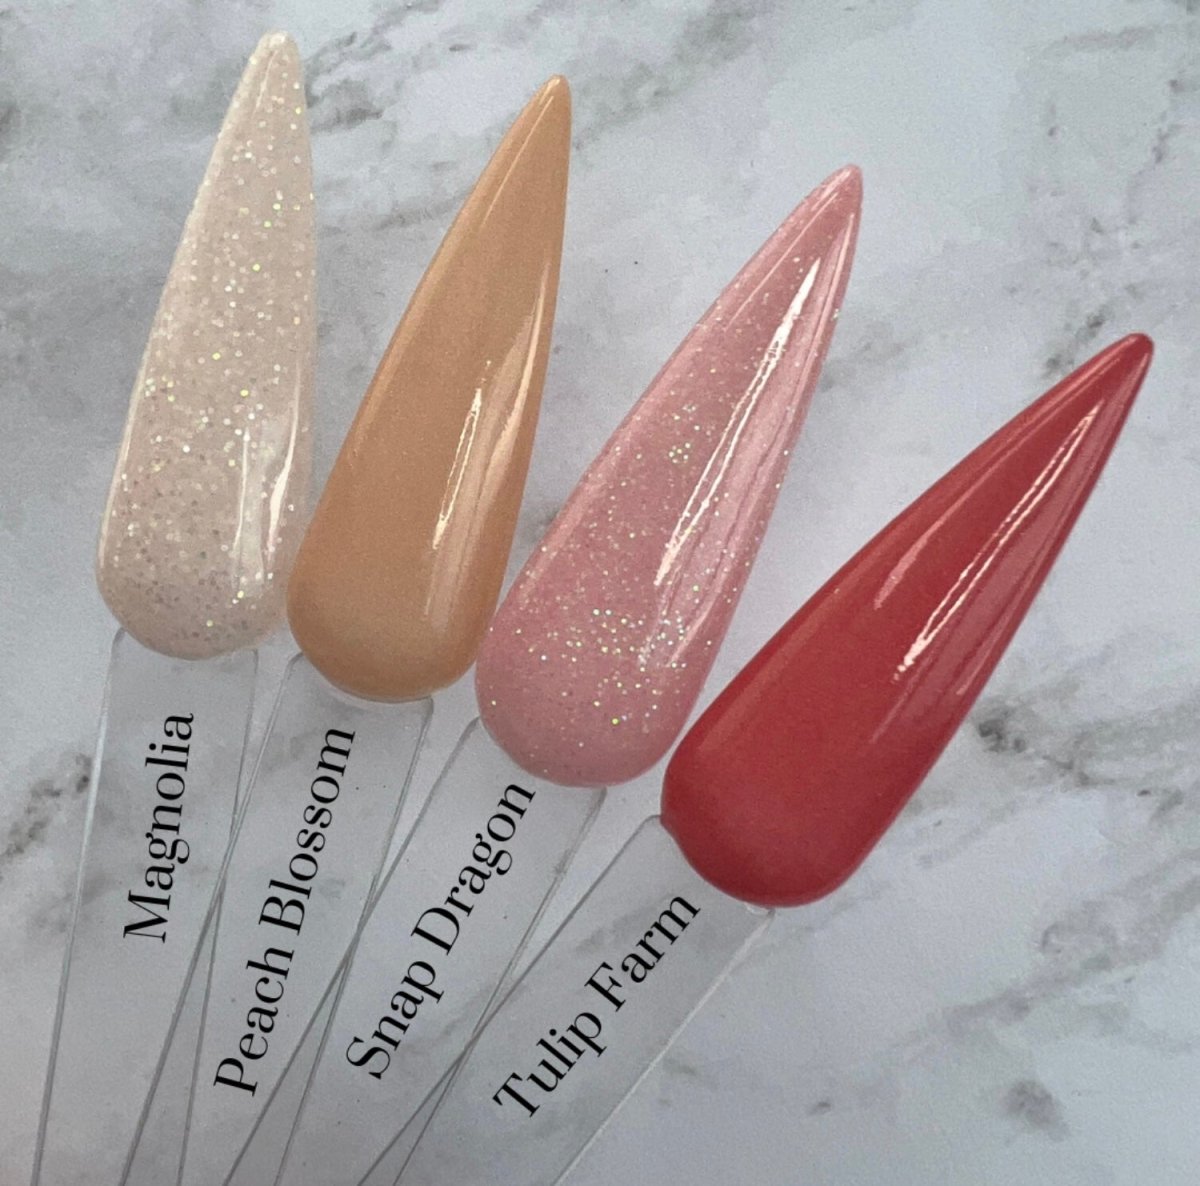 Photo shows swatch of Dipnotic Nails The Garden Collection Pinks Nail Dip Powder Collection